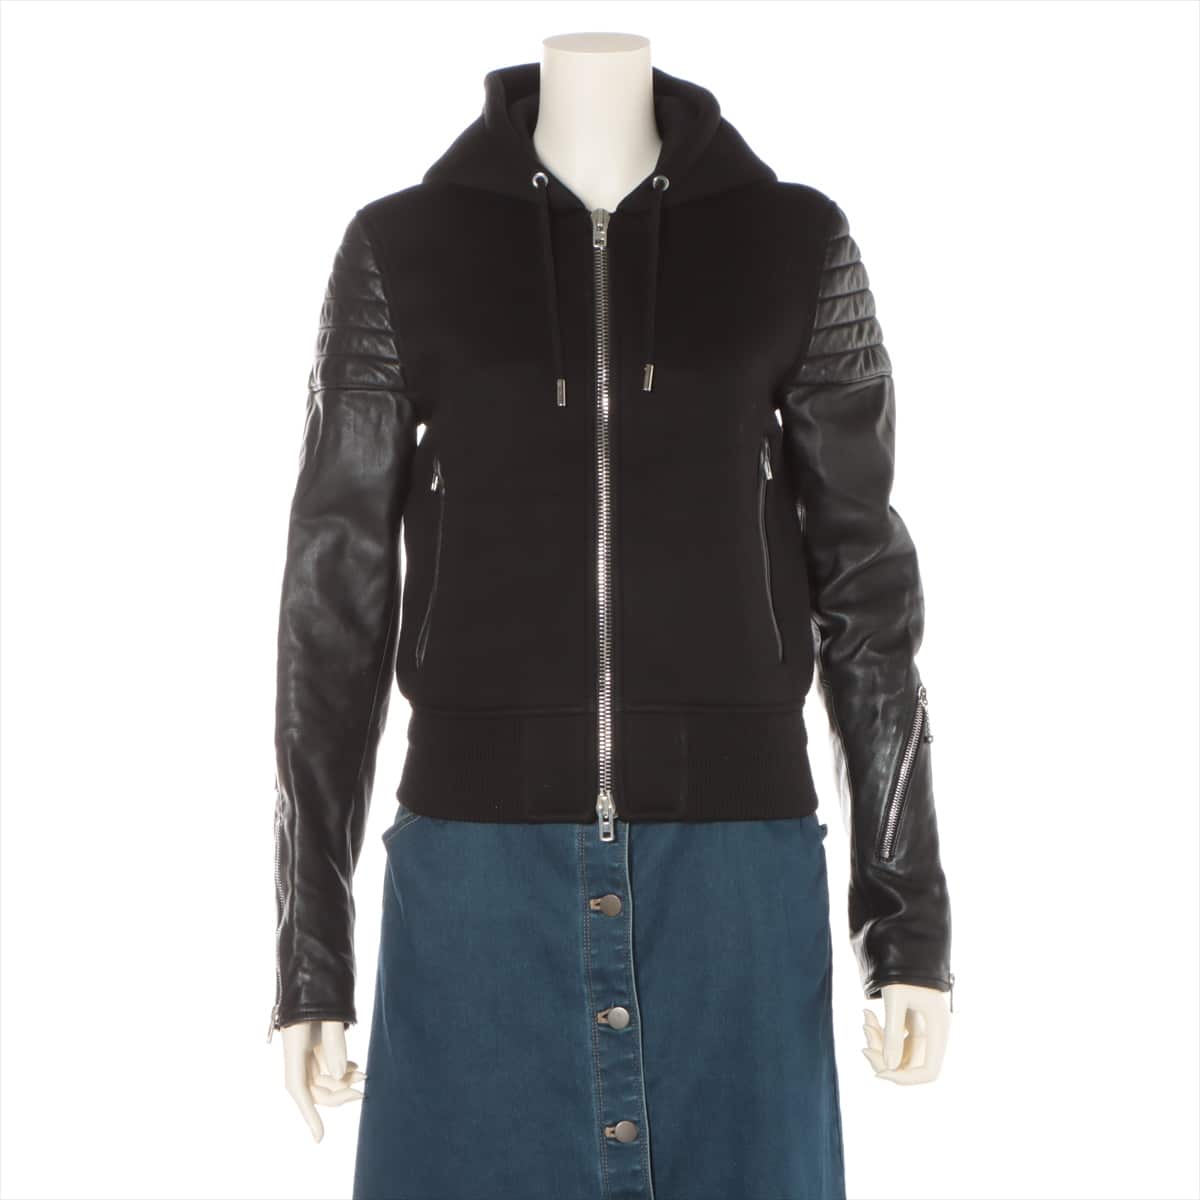 Givenchy Rayon Jacket 34 Ladies' Black  Neo Puren Switch between arm ram leather